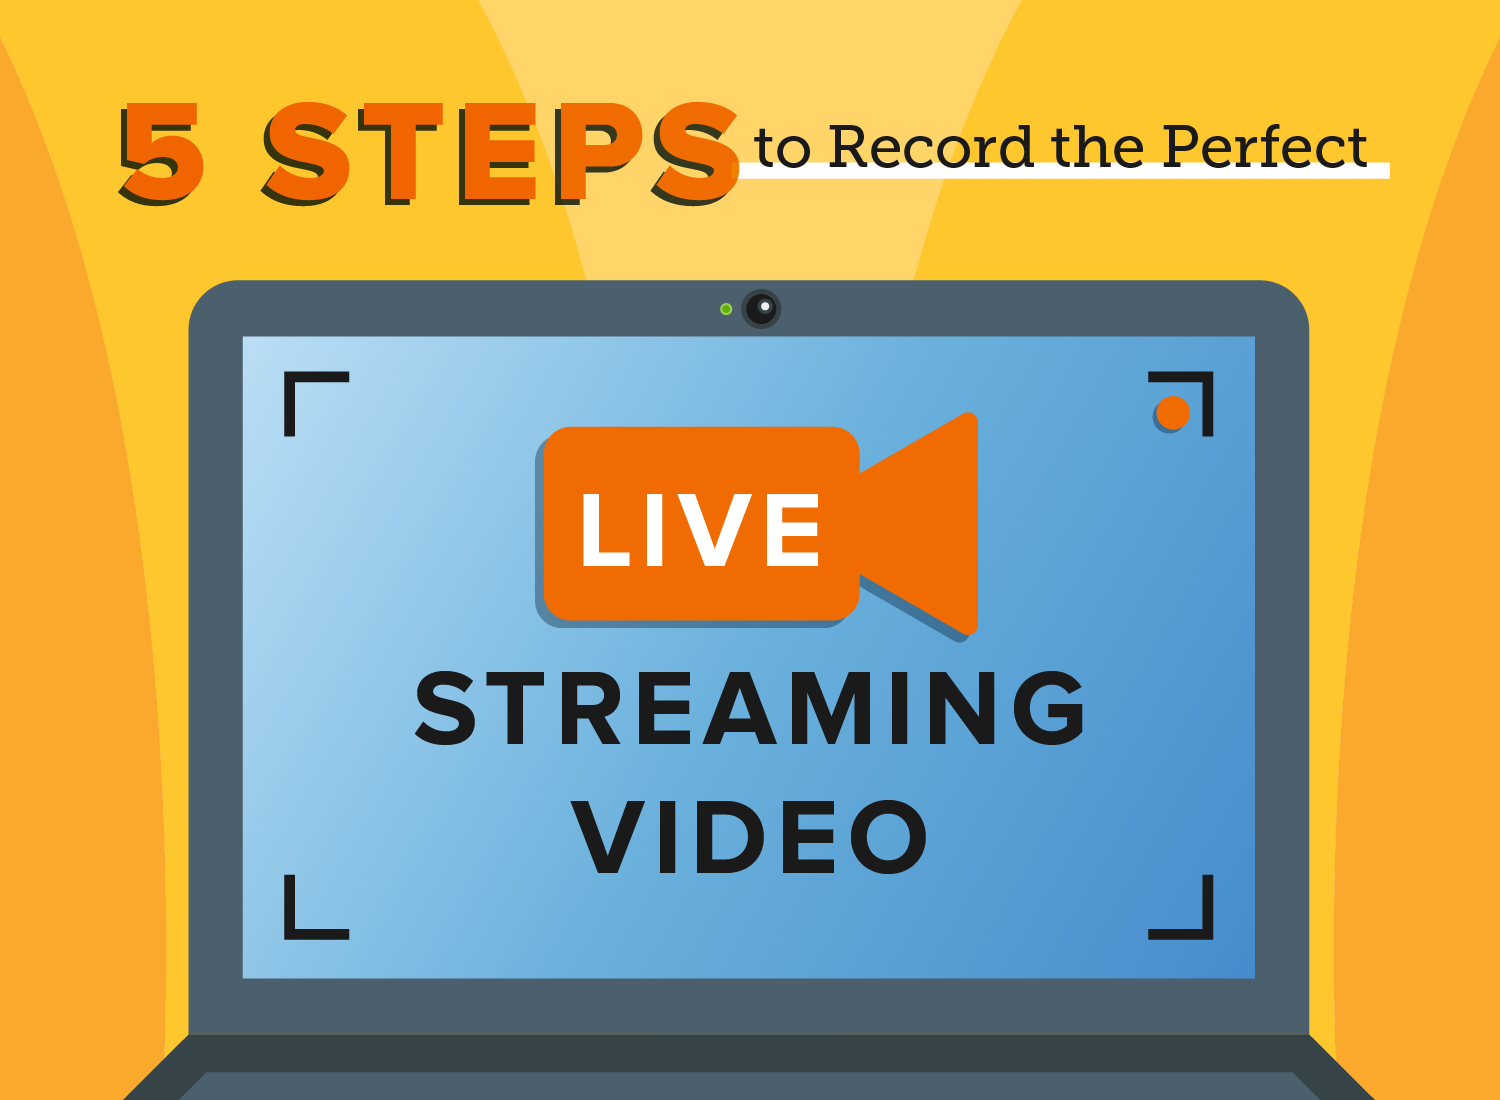 Dissipation Lengthen atmosphere 5 Steps to Record the Perfect Live Streaming Video | The TechSmith Blog